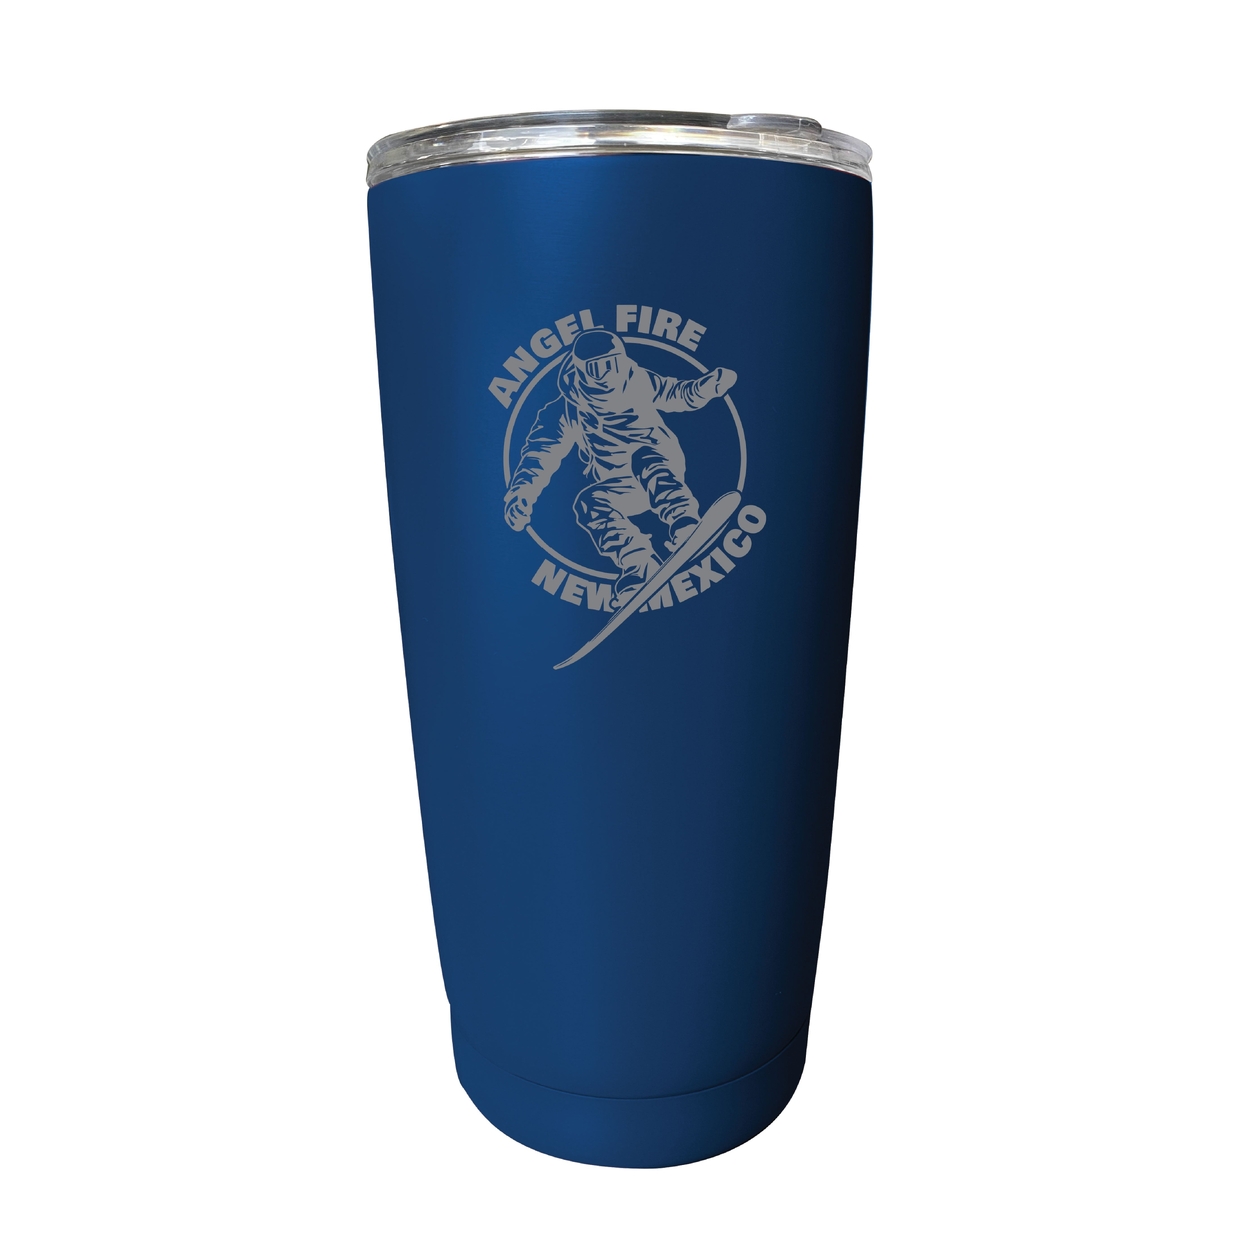 Angel Fire New Mexico Souvenir 16 Oz Engraved Stainless Steel Insulated Tumbler - Navy,,2-Pack